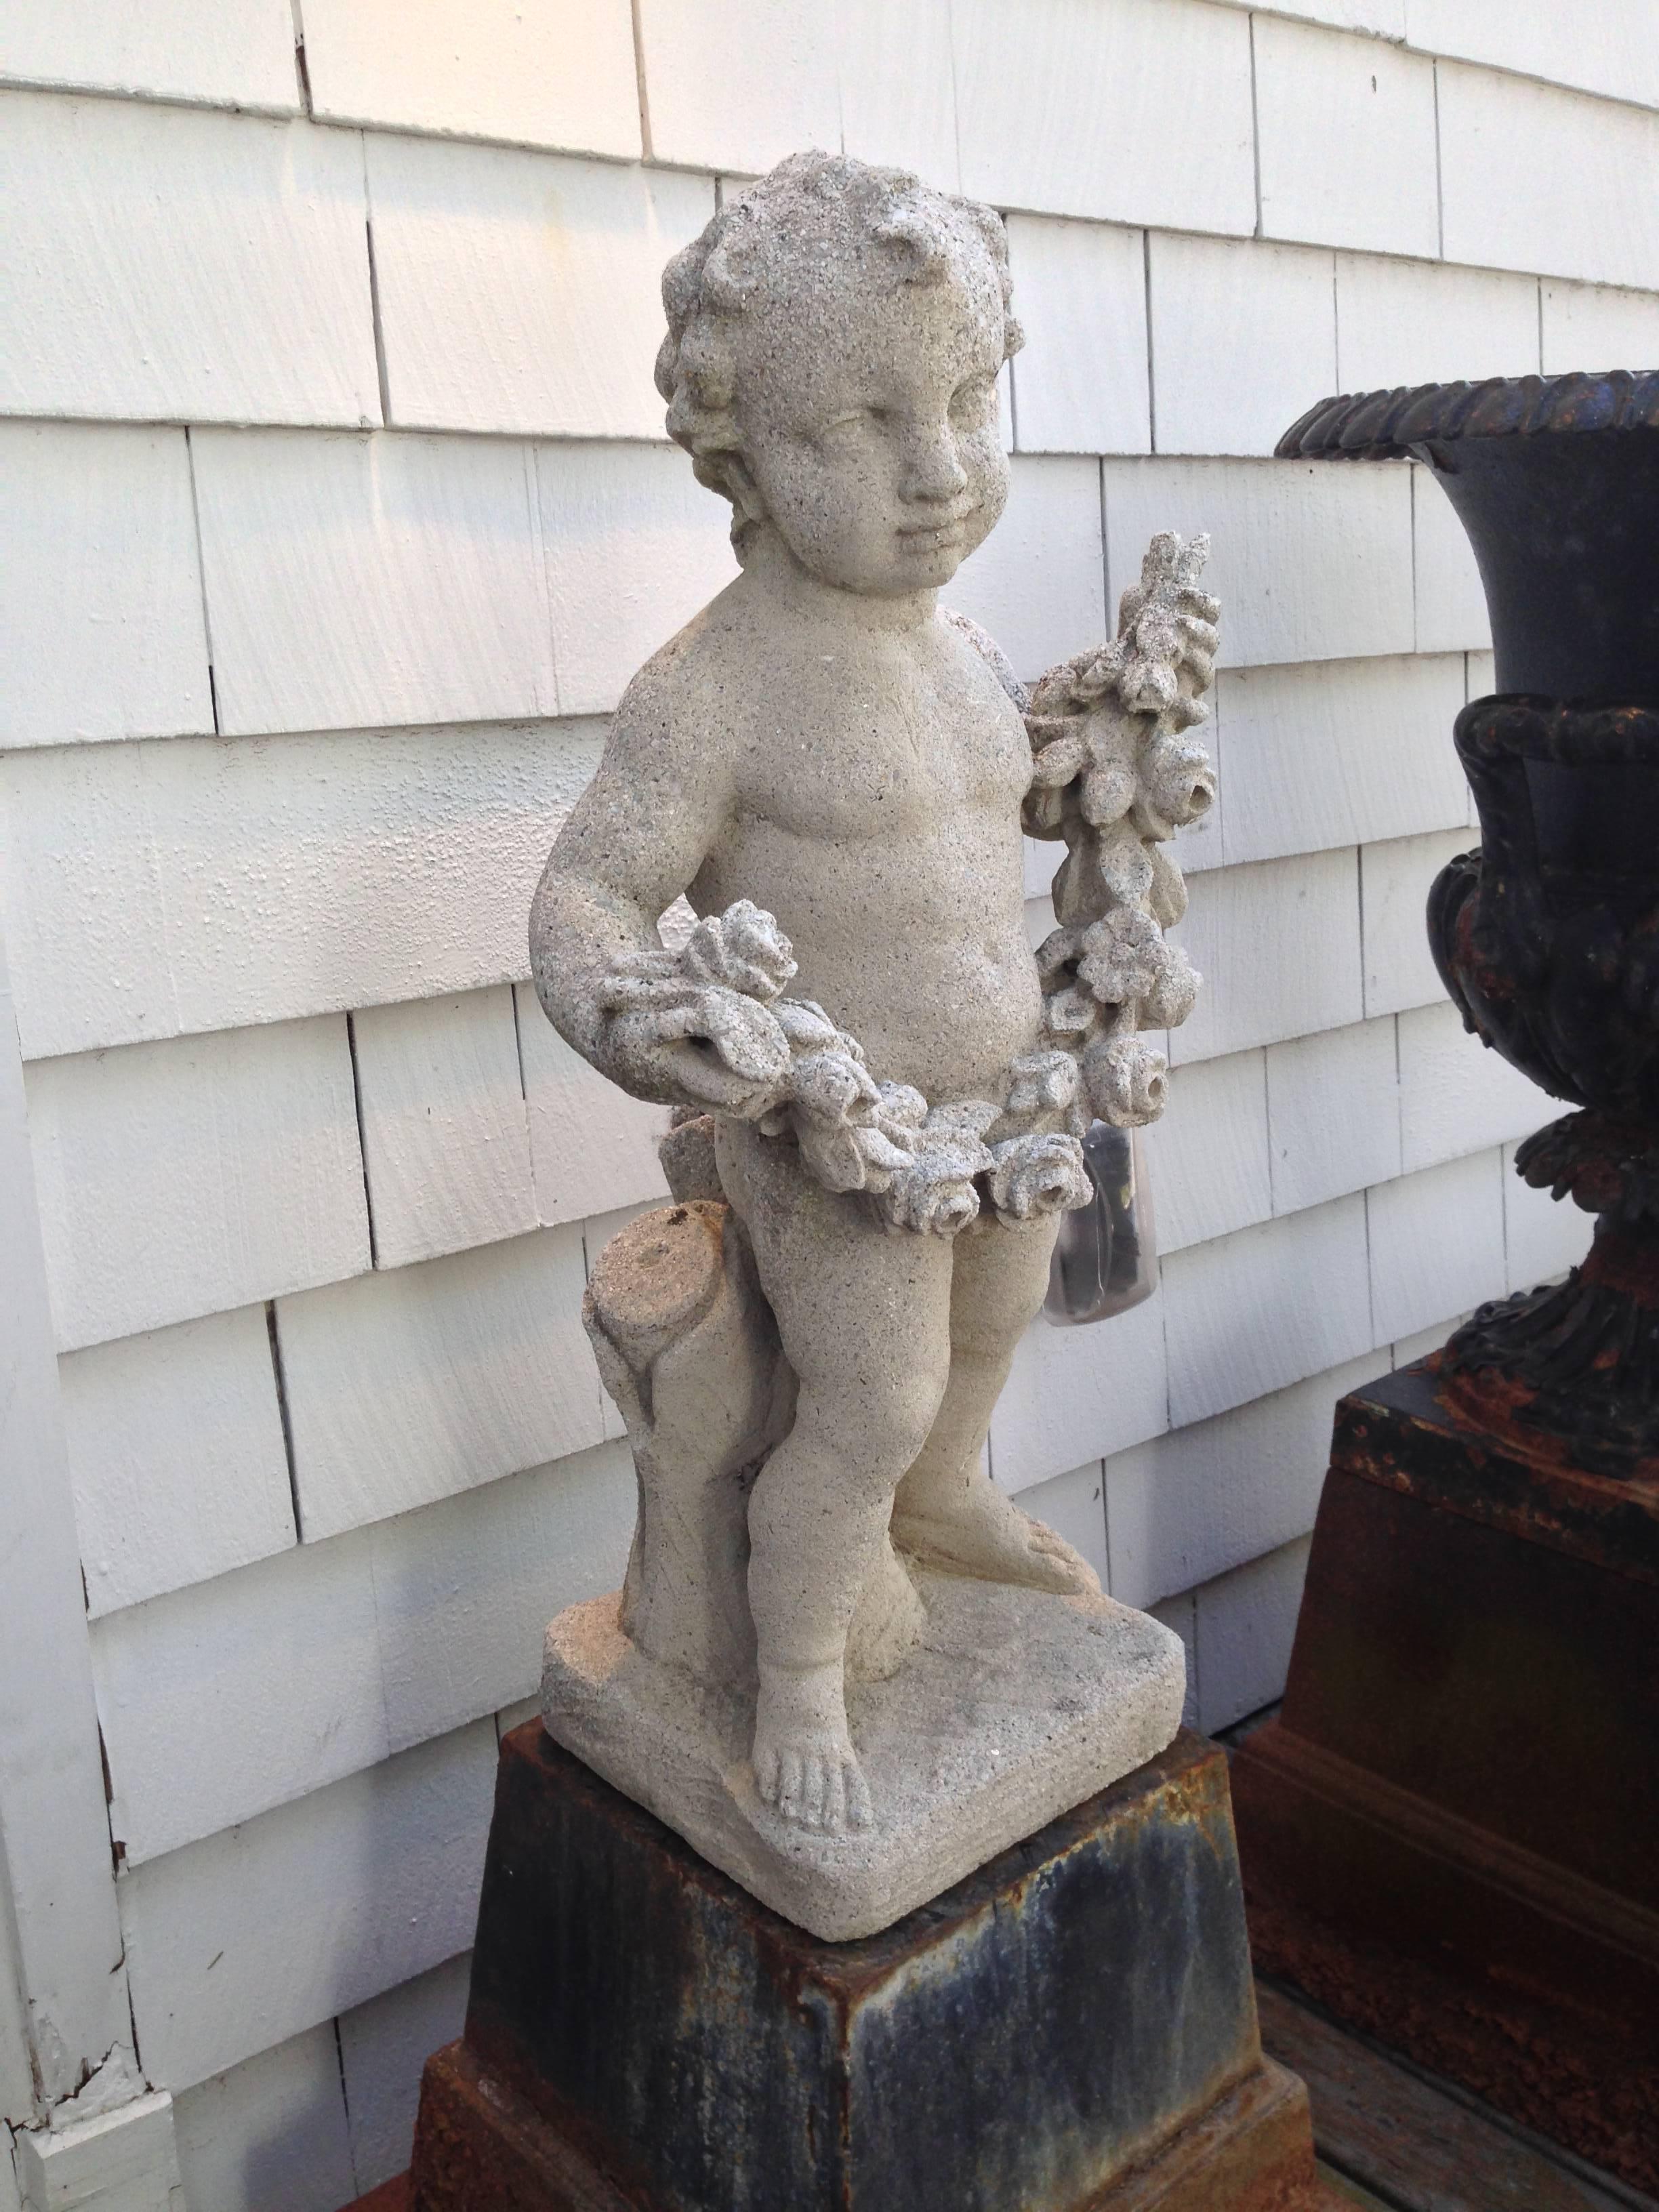 An early 20th century cast stone statue of a putto holding a delicate floral garland.